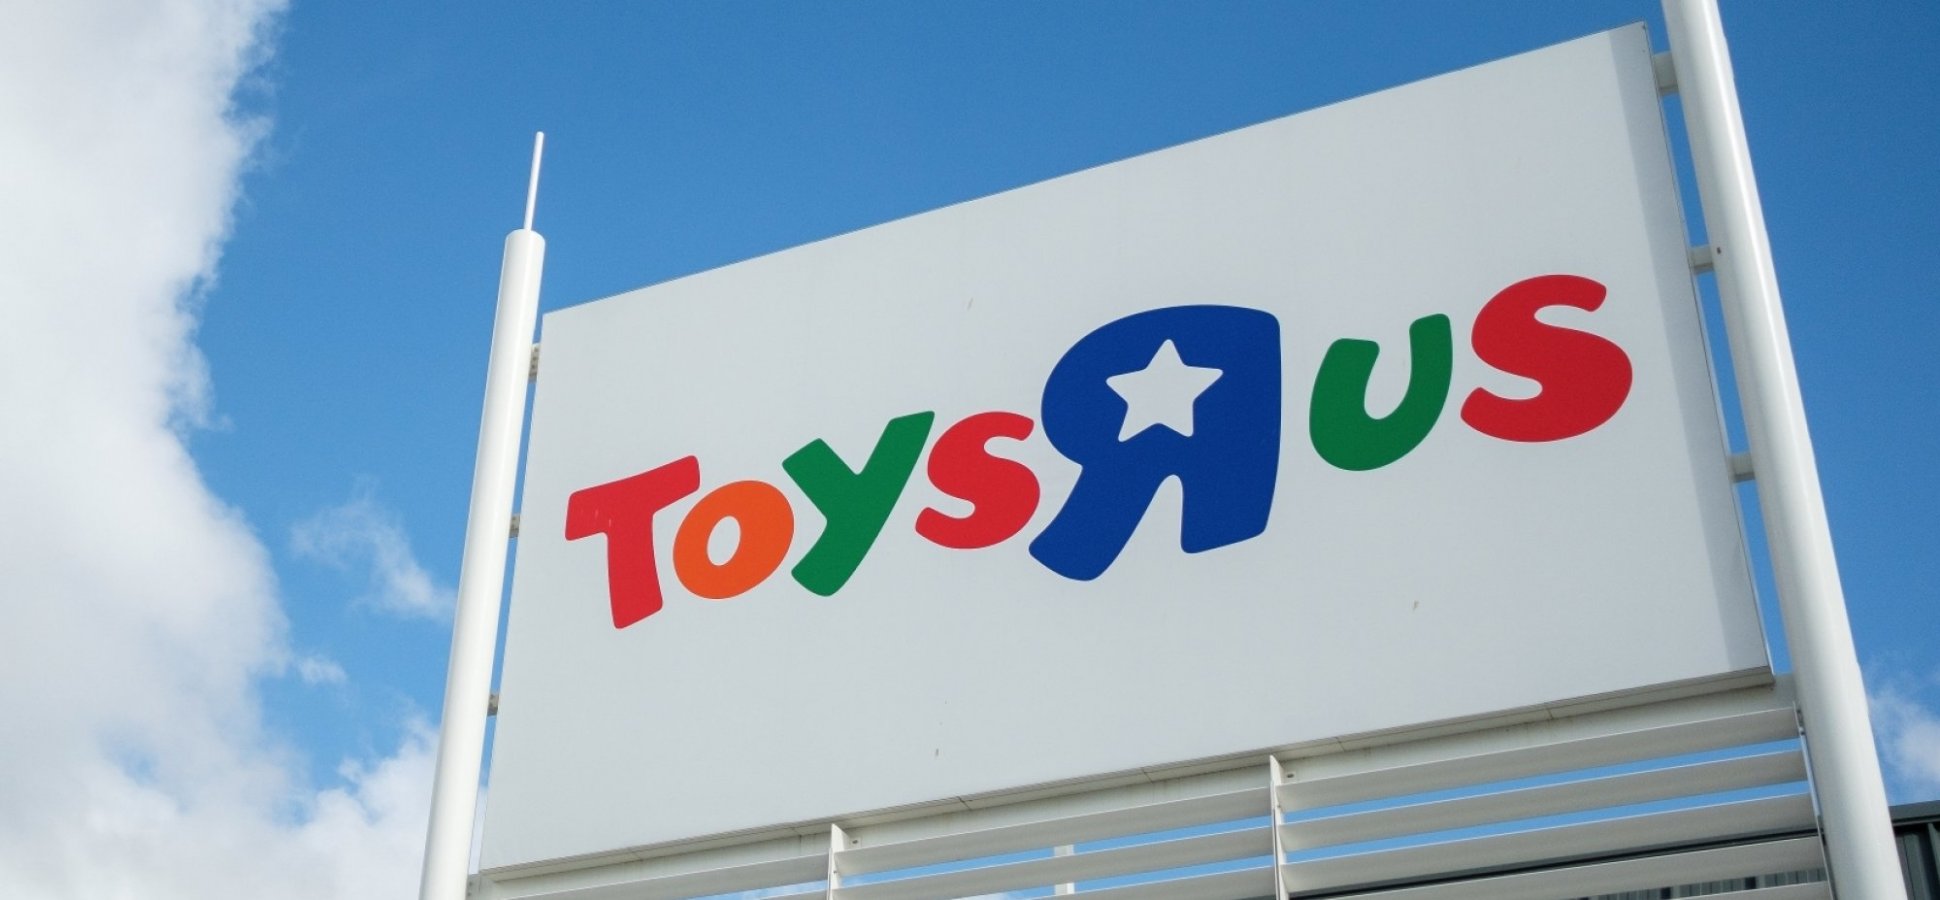 toys r us opening again 2019